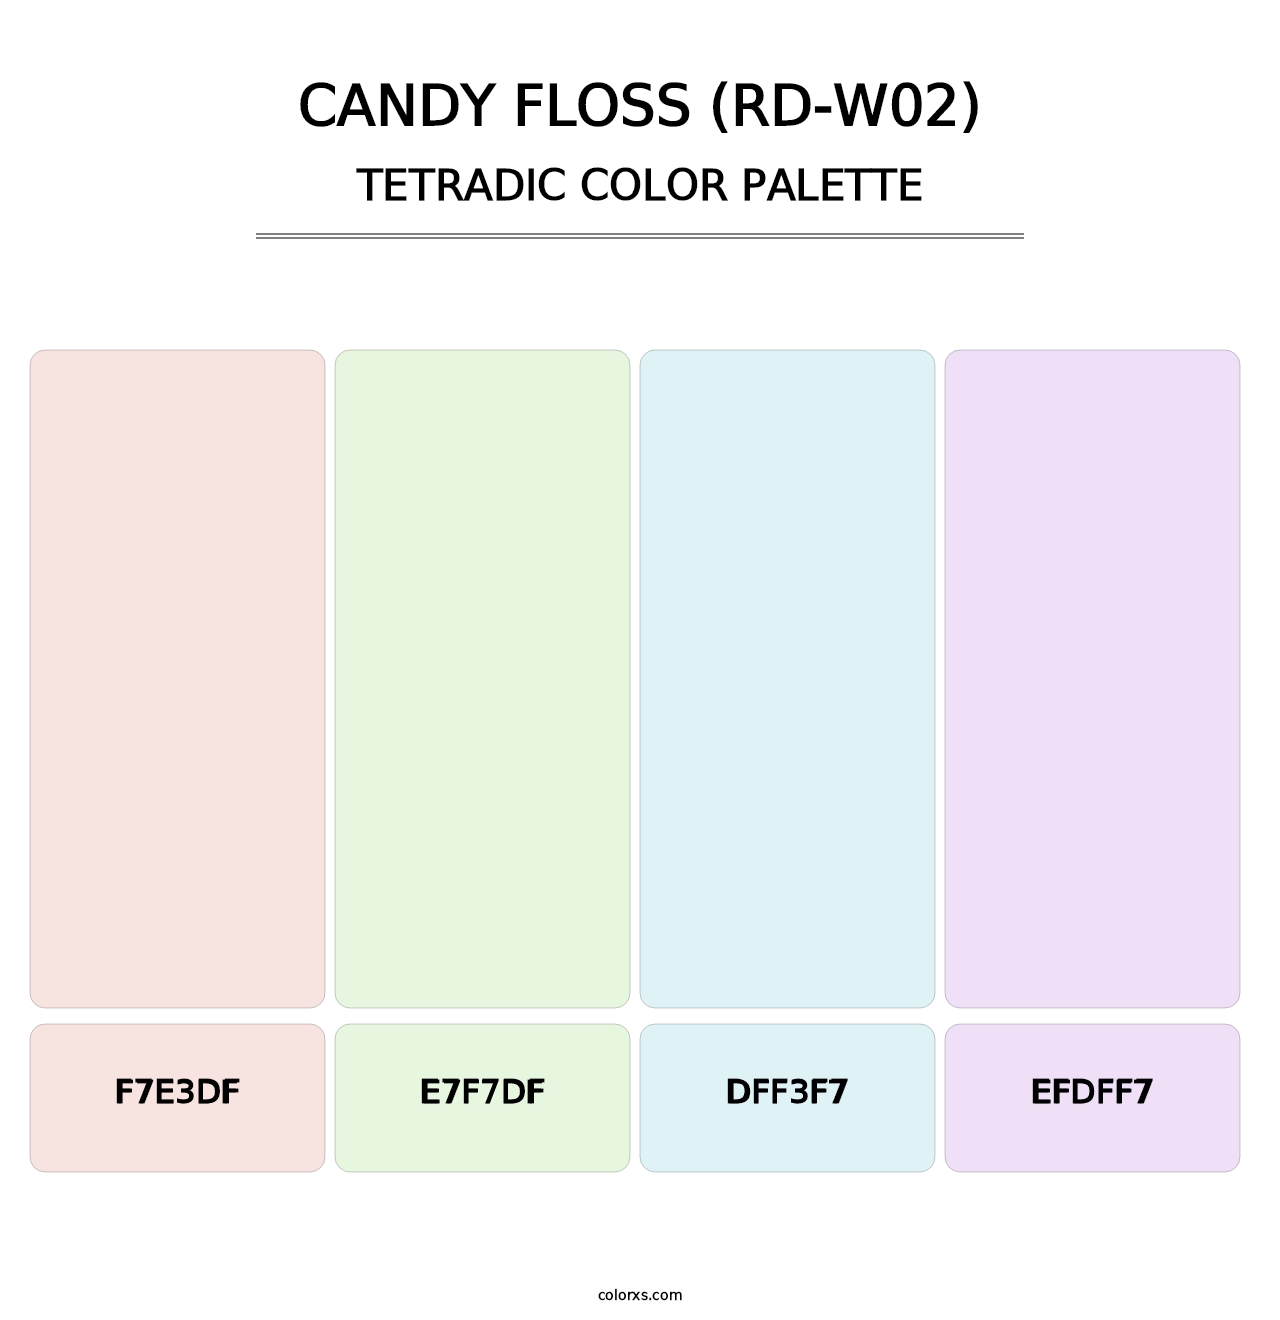 Candy Floss (RD-W02) - Tetradic Color Palette